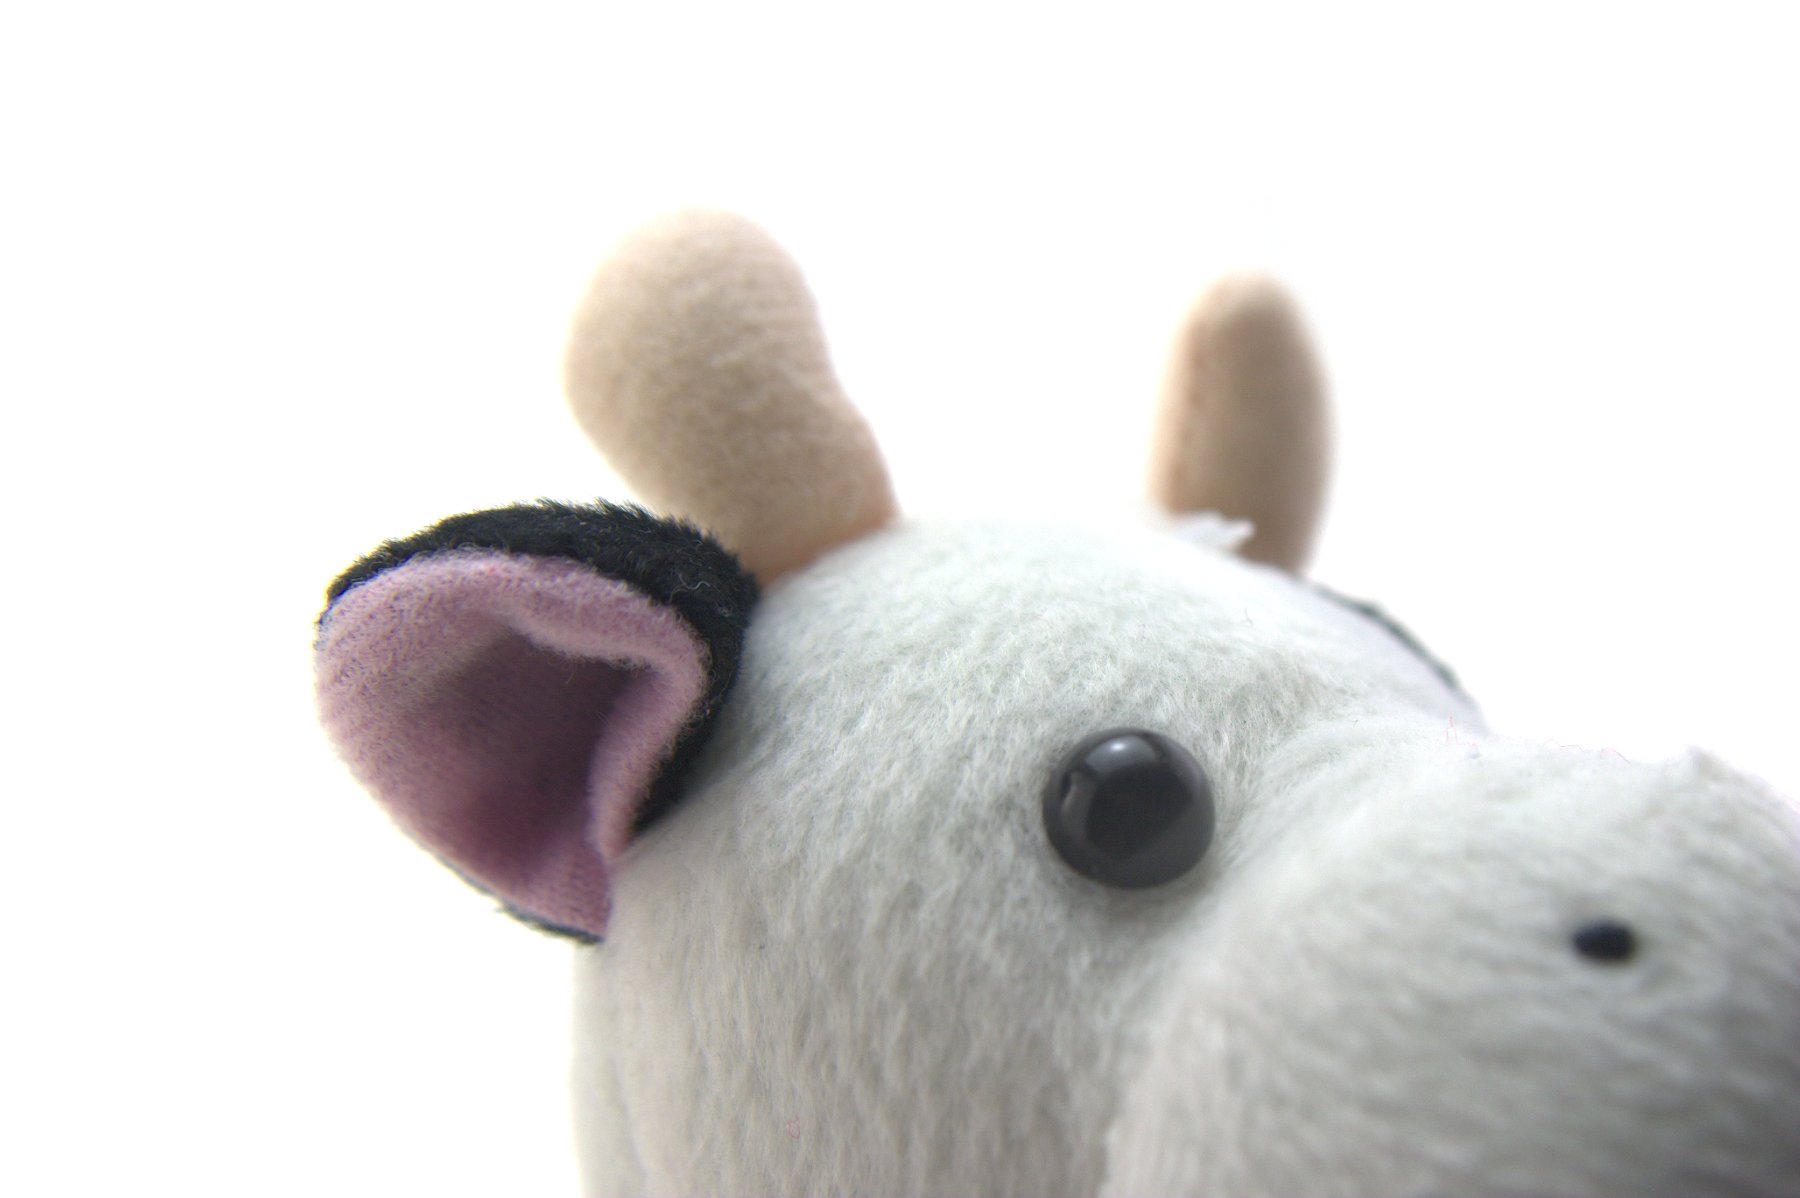 Funny cow toy, Agricultural, Obedient, Isolated, Joy, HQ Photo